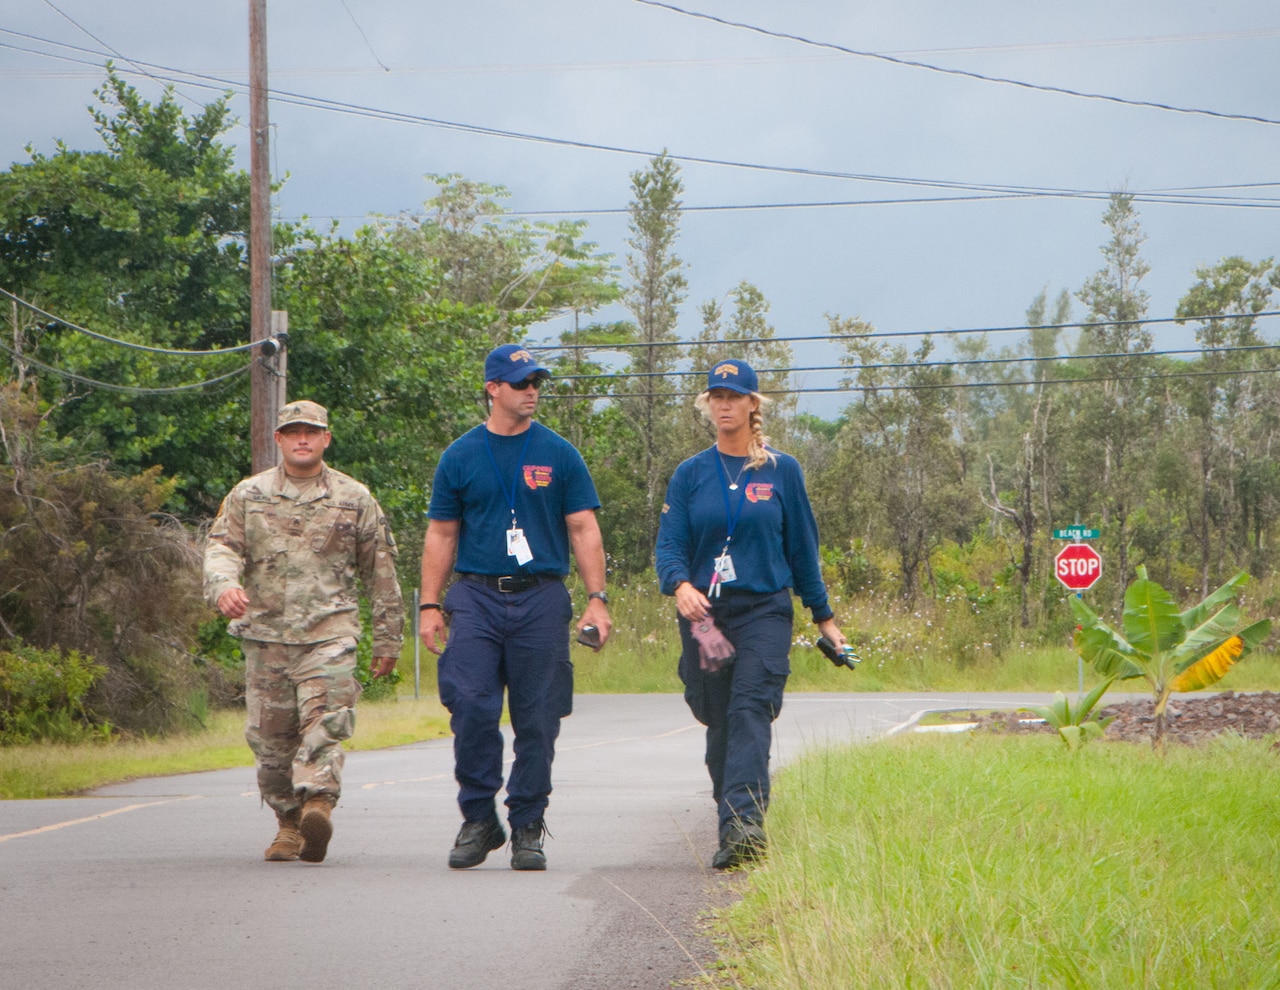 Staff Sgt. William Muira, from the Hawaii National Guard's CBRNE Enhanced Response Force Package (CERFP) Team, escorts FEMA Urban Search and Rescue members from California Task Force 3 while they perform a wide-area assessment in the wake of Hurricane Lane in Kea'au, Hawaii, on Aug. 27, 2018.